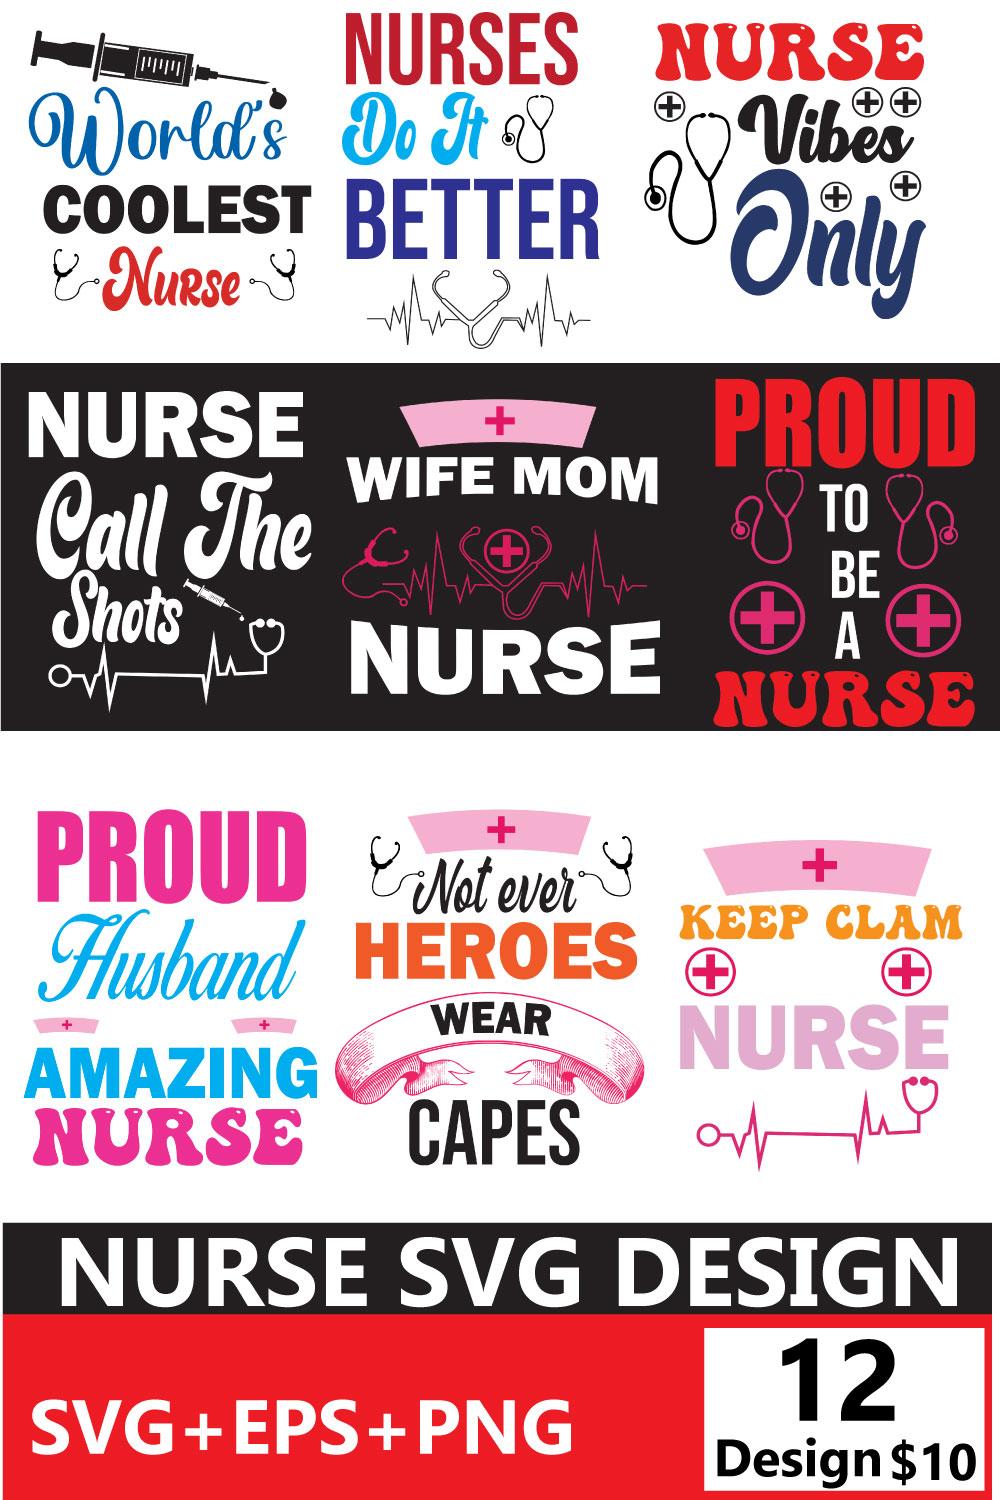 A collection of amazing images for prints on the theme of nurses